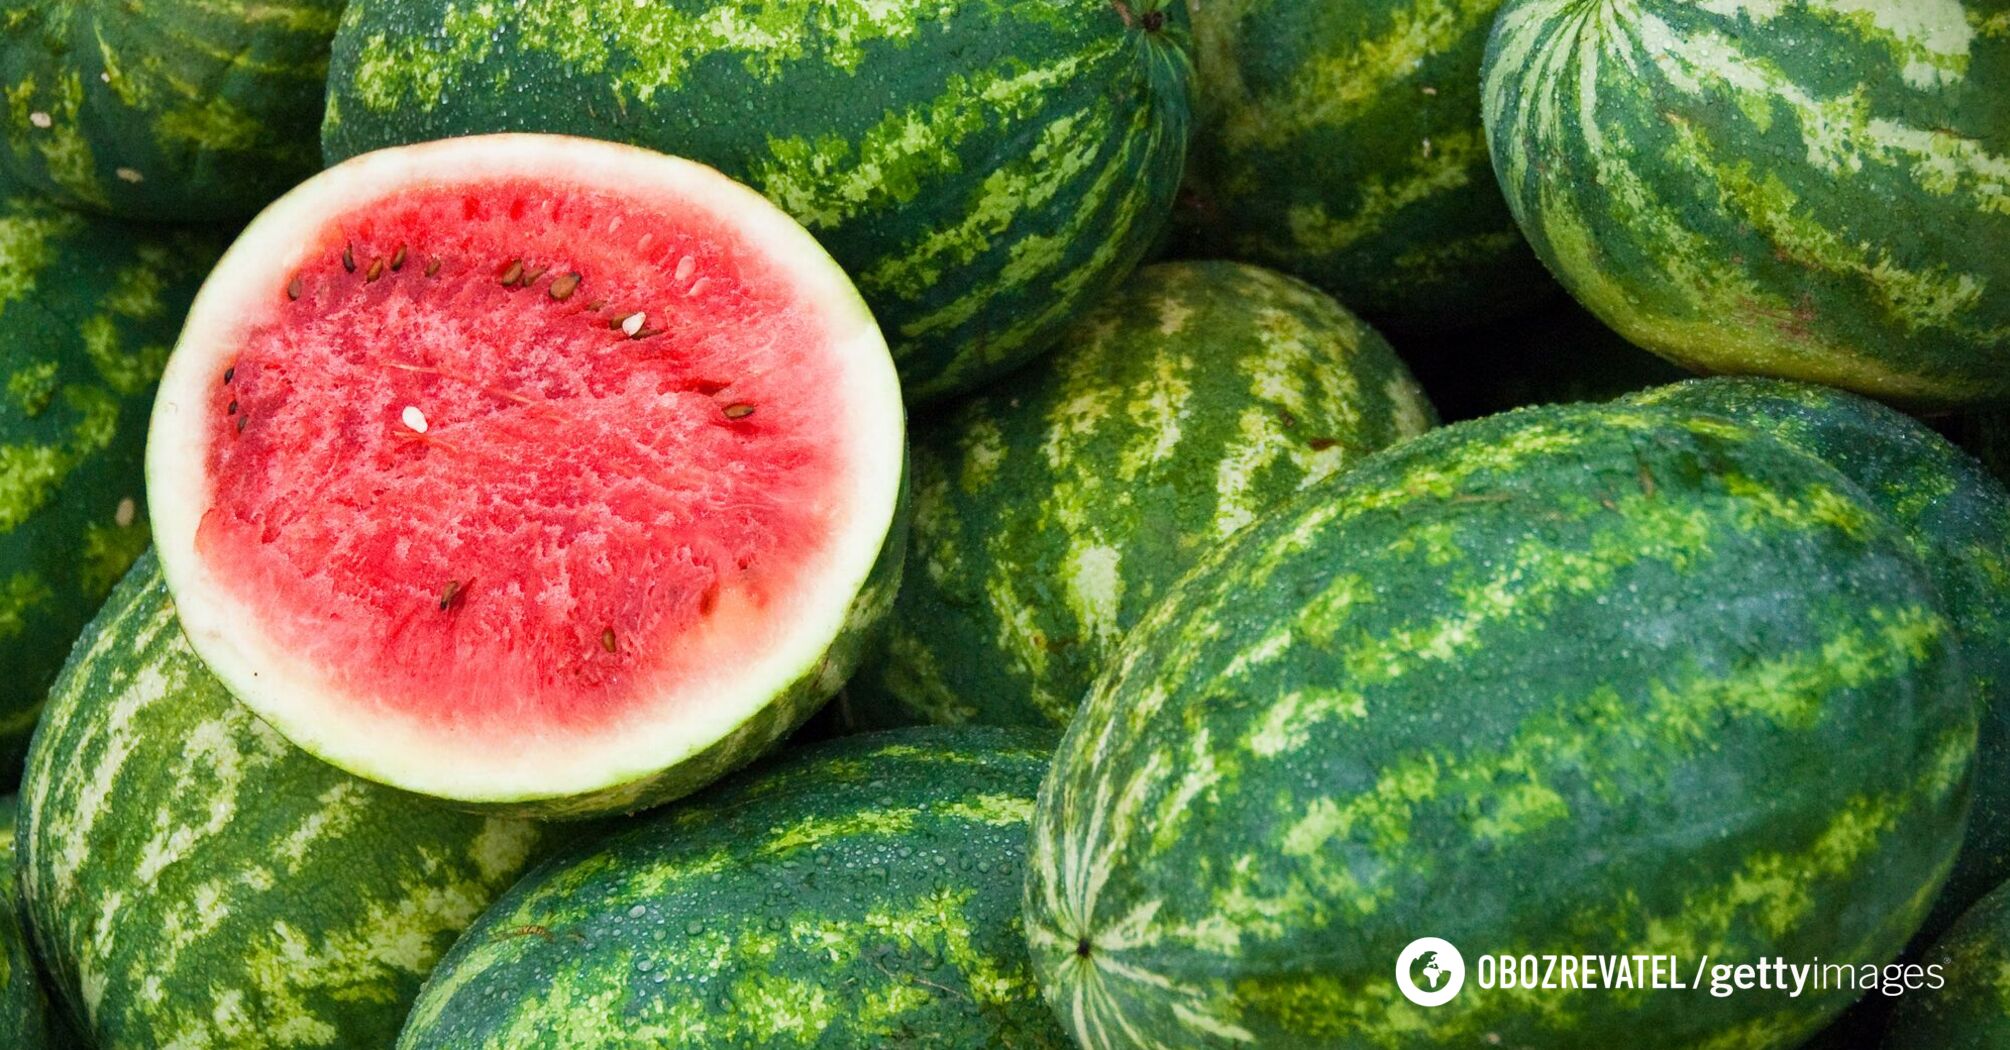 How to choose a ripe watermelon